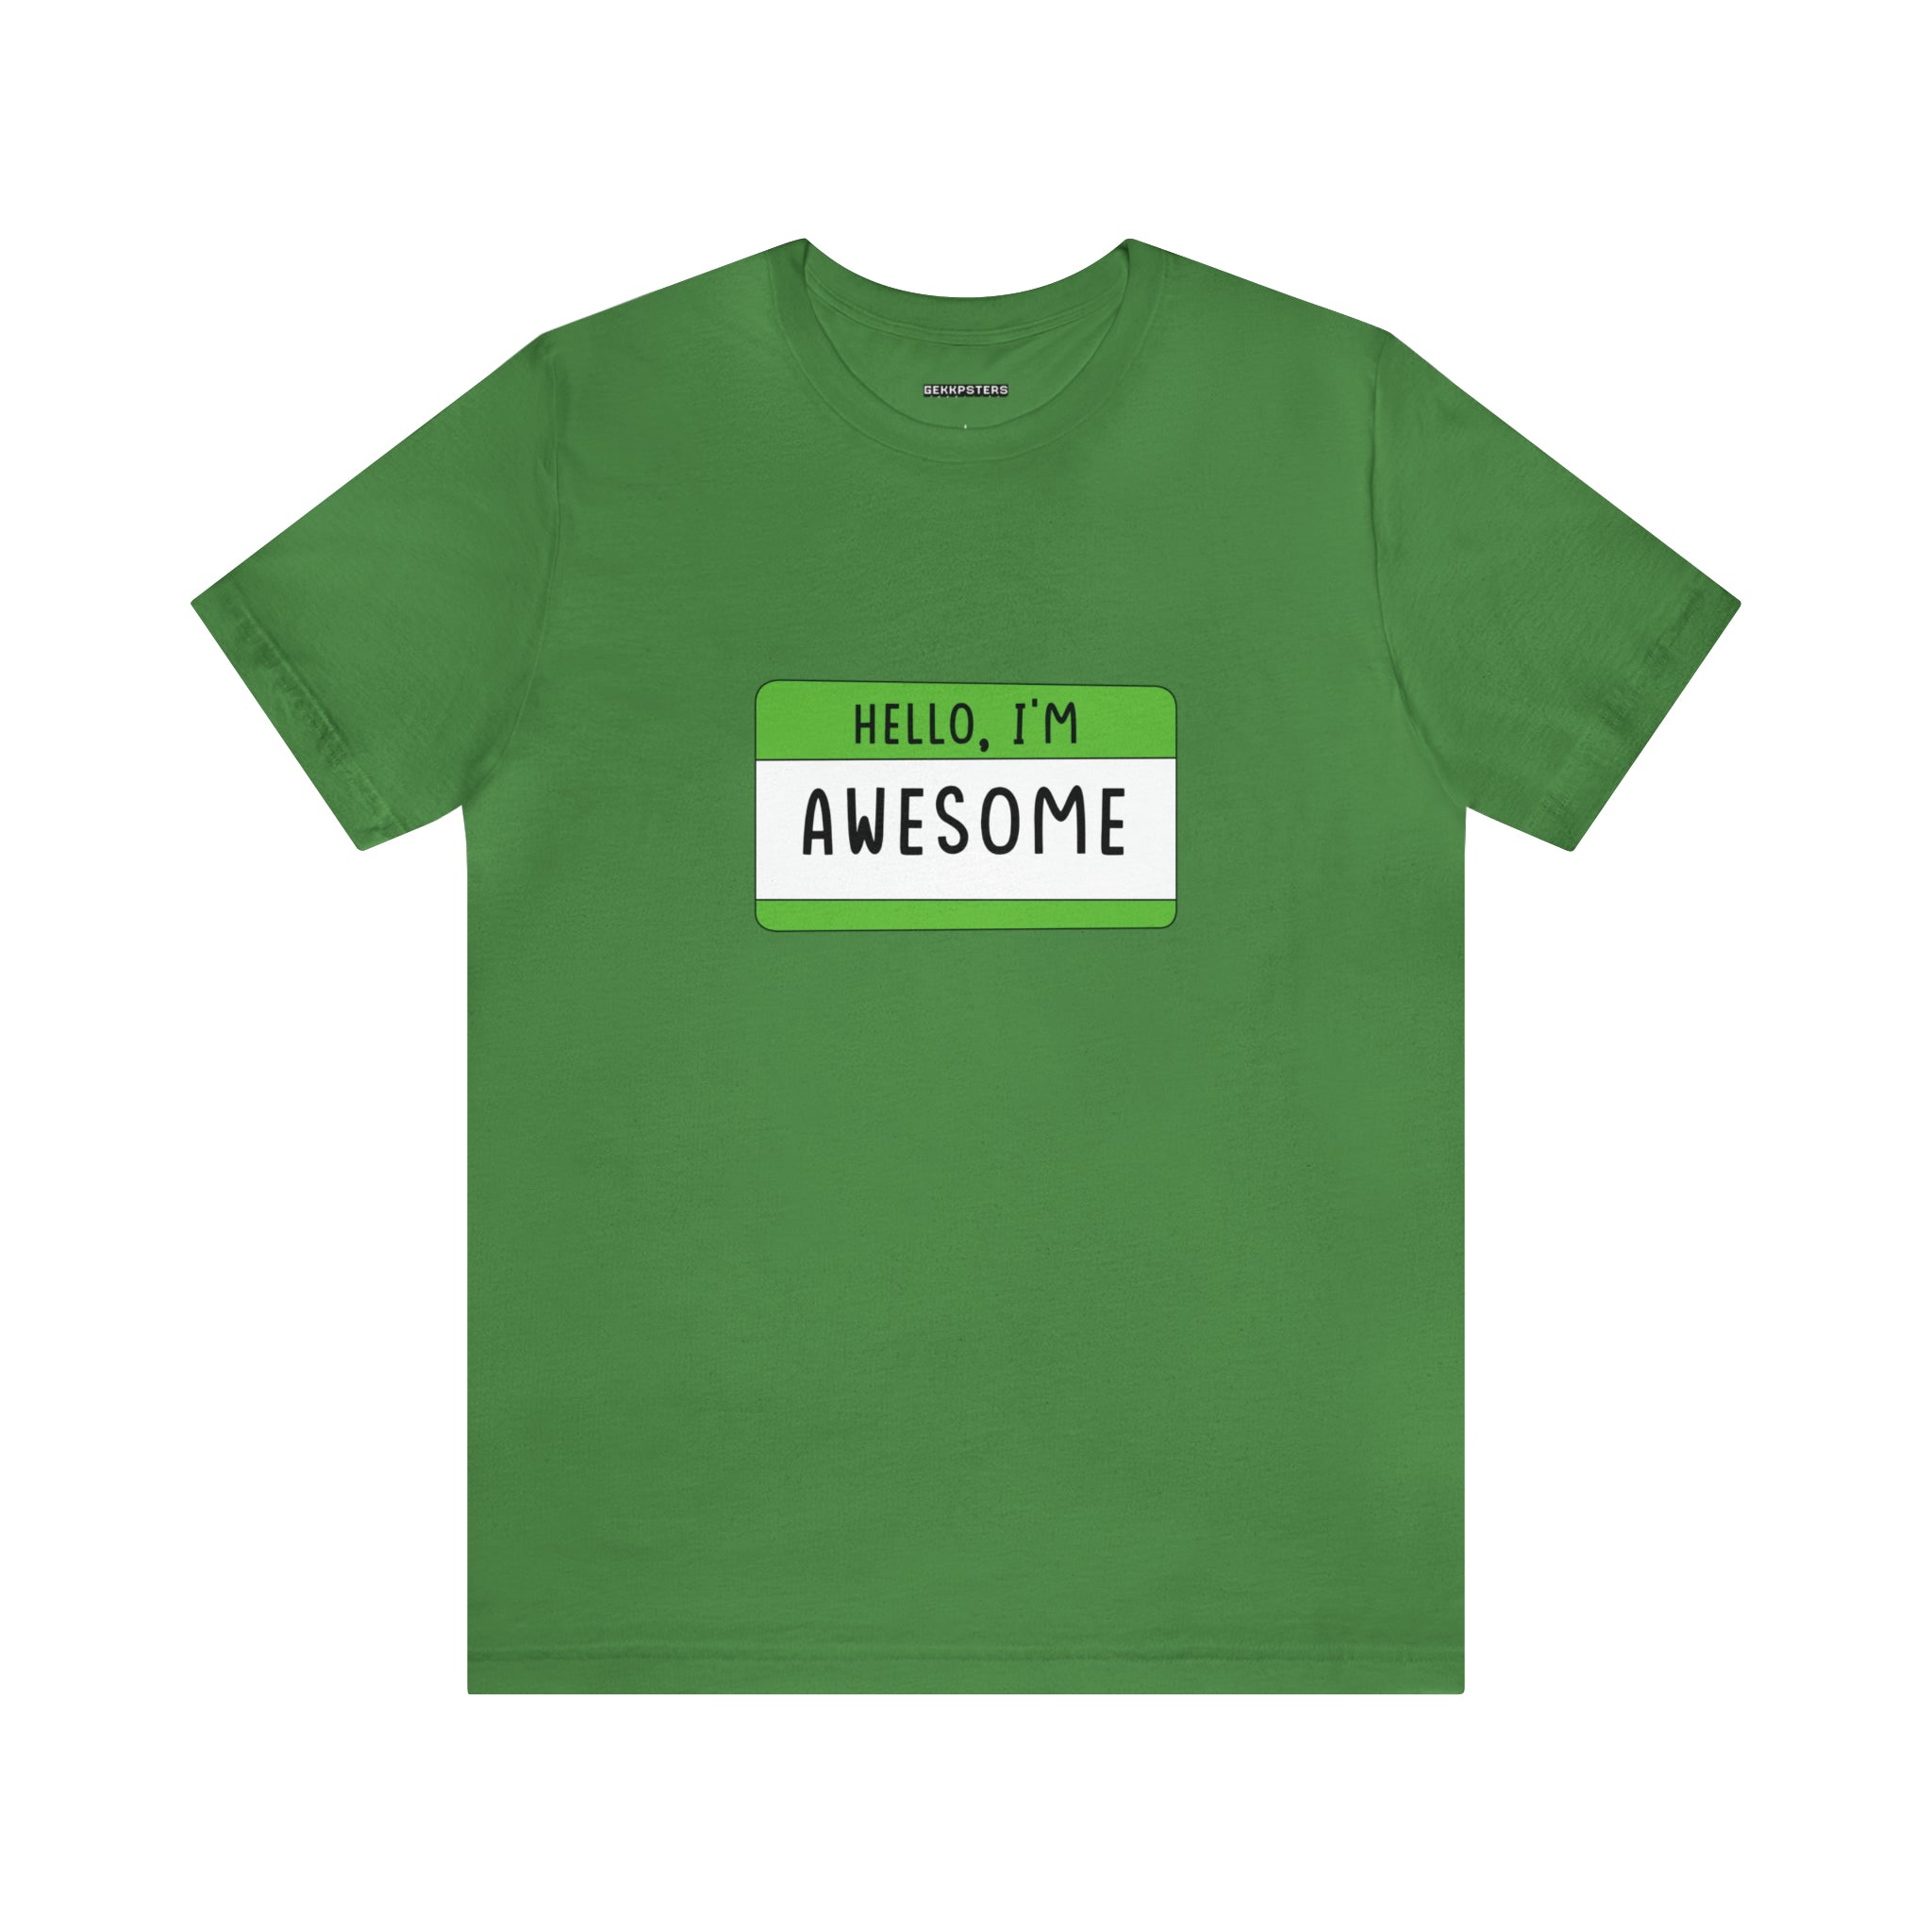 Hello, I'm Awesome T-Shirt with a white name tag graphic that reads "hello, I'm awesome" on the chest, perfect for gamers and geeks.